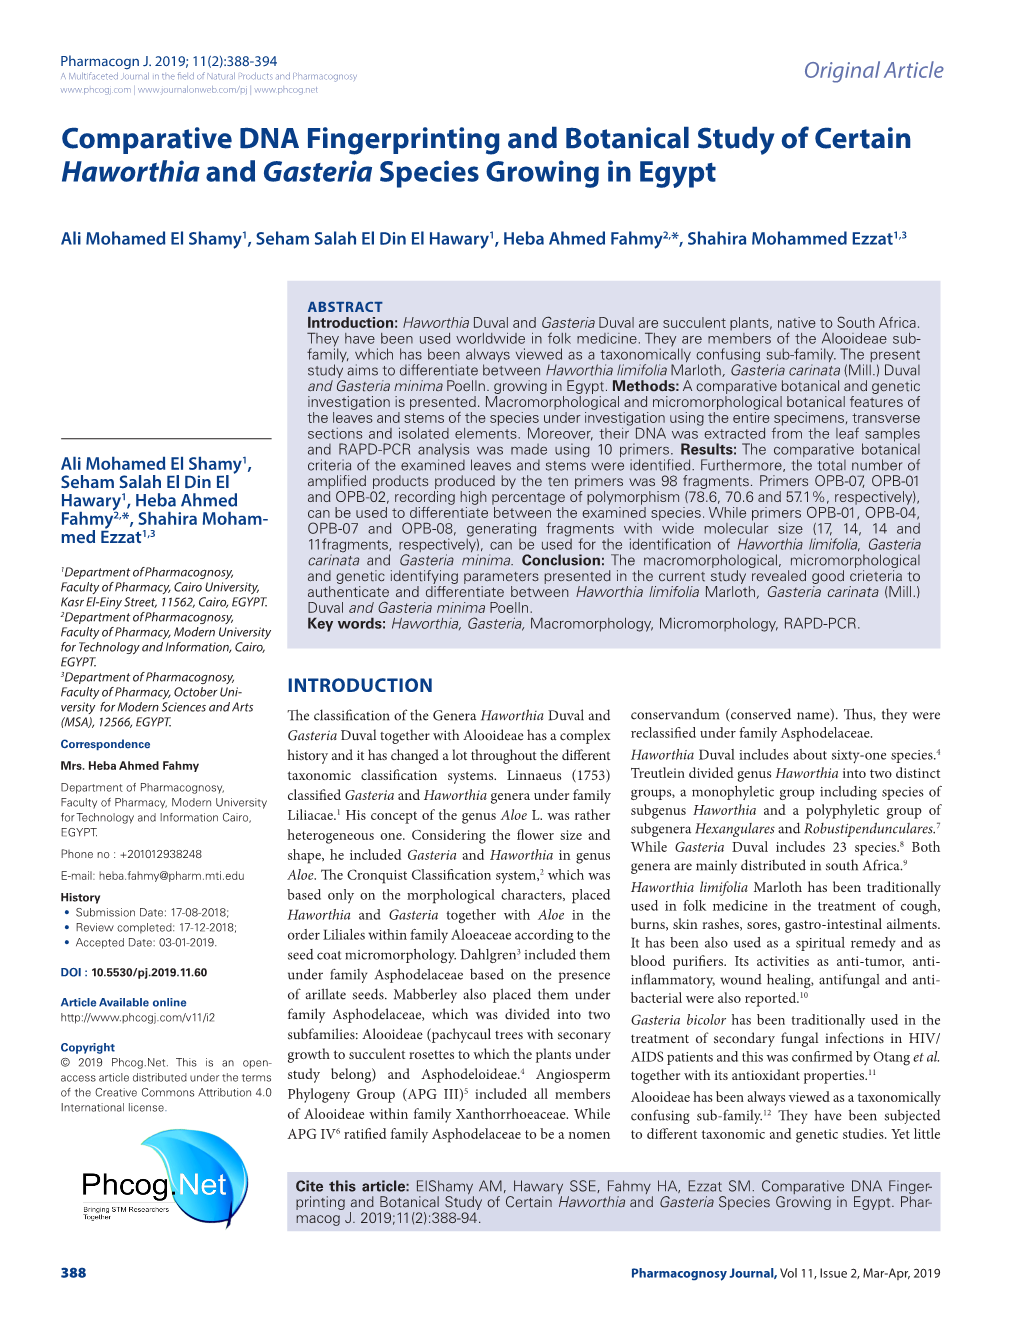 Comparative DNA Fingerprinting and Botanical Study of Certain Haworthia and Gasteria Species Growing in Egypt